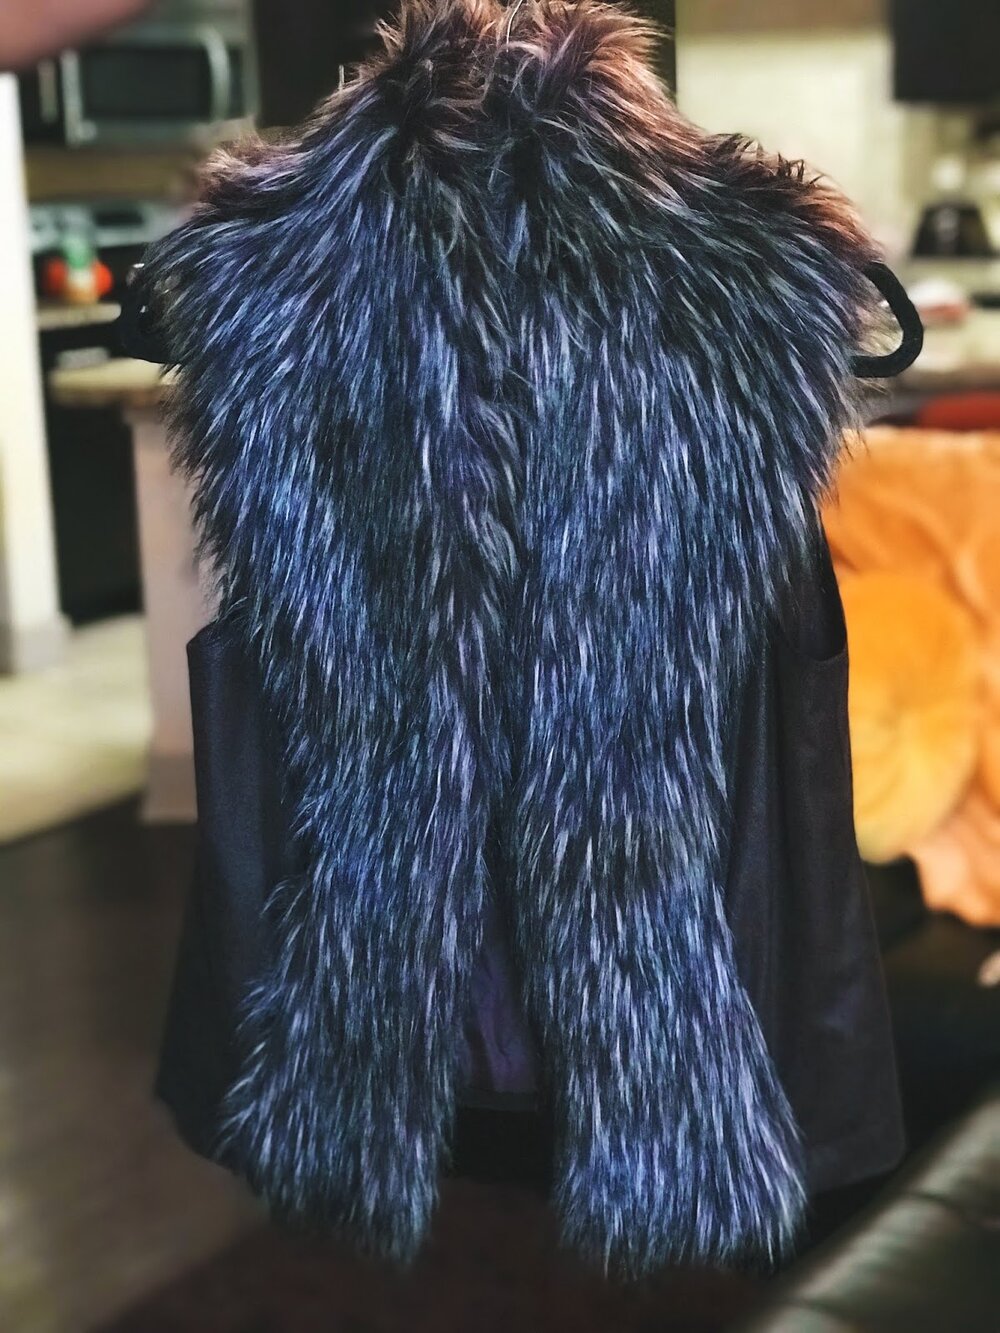 Quick OOTD: Cheetah Print Shoes and Fur Vests That Make You Feel Super Fancy!